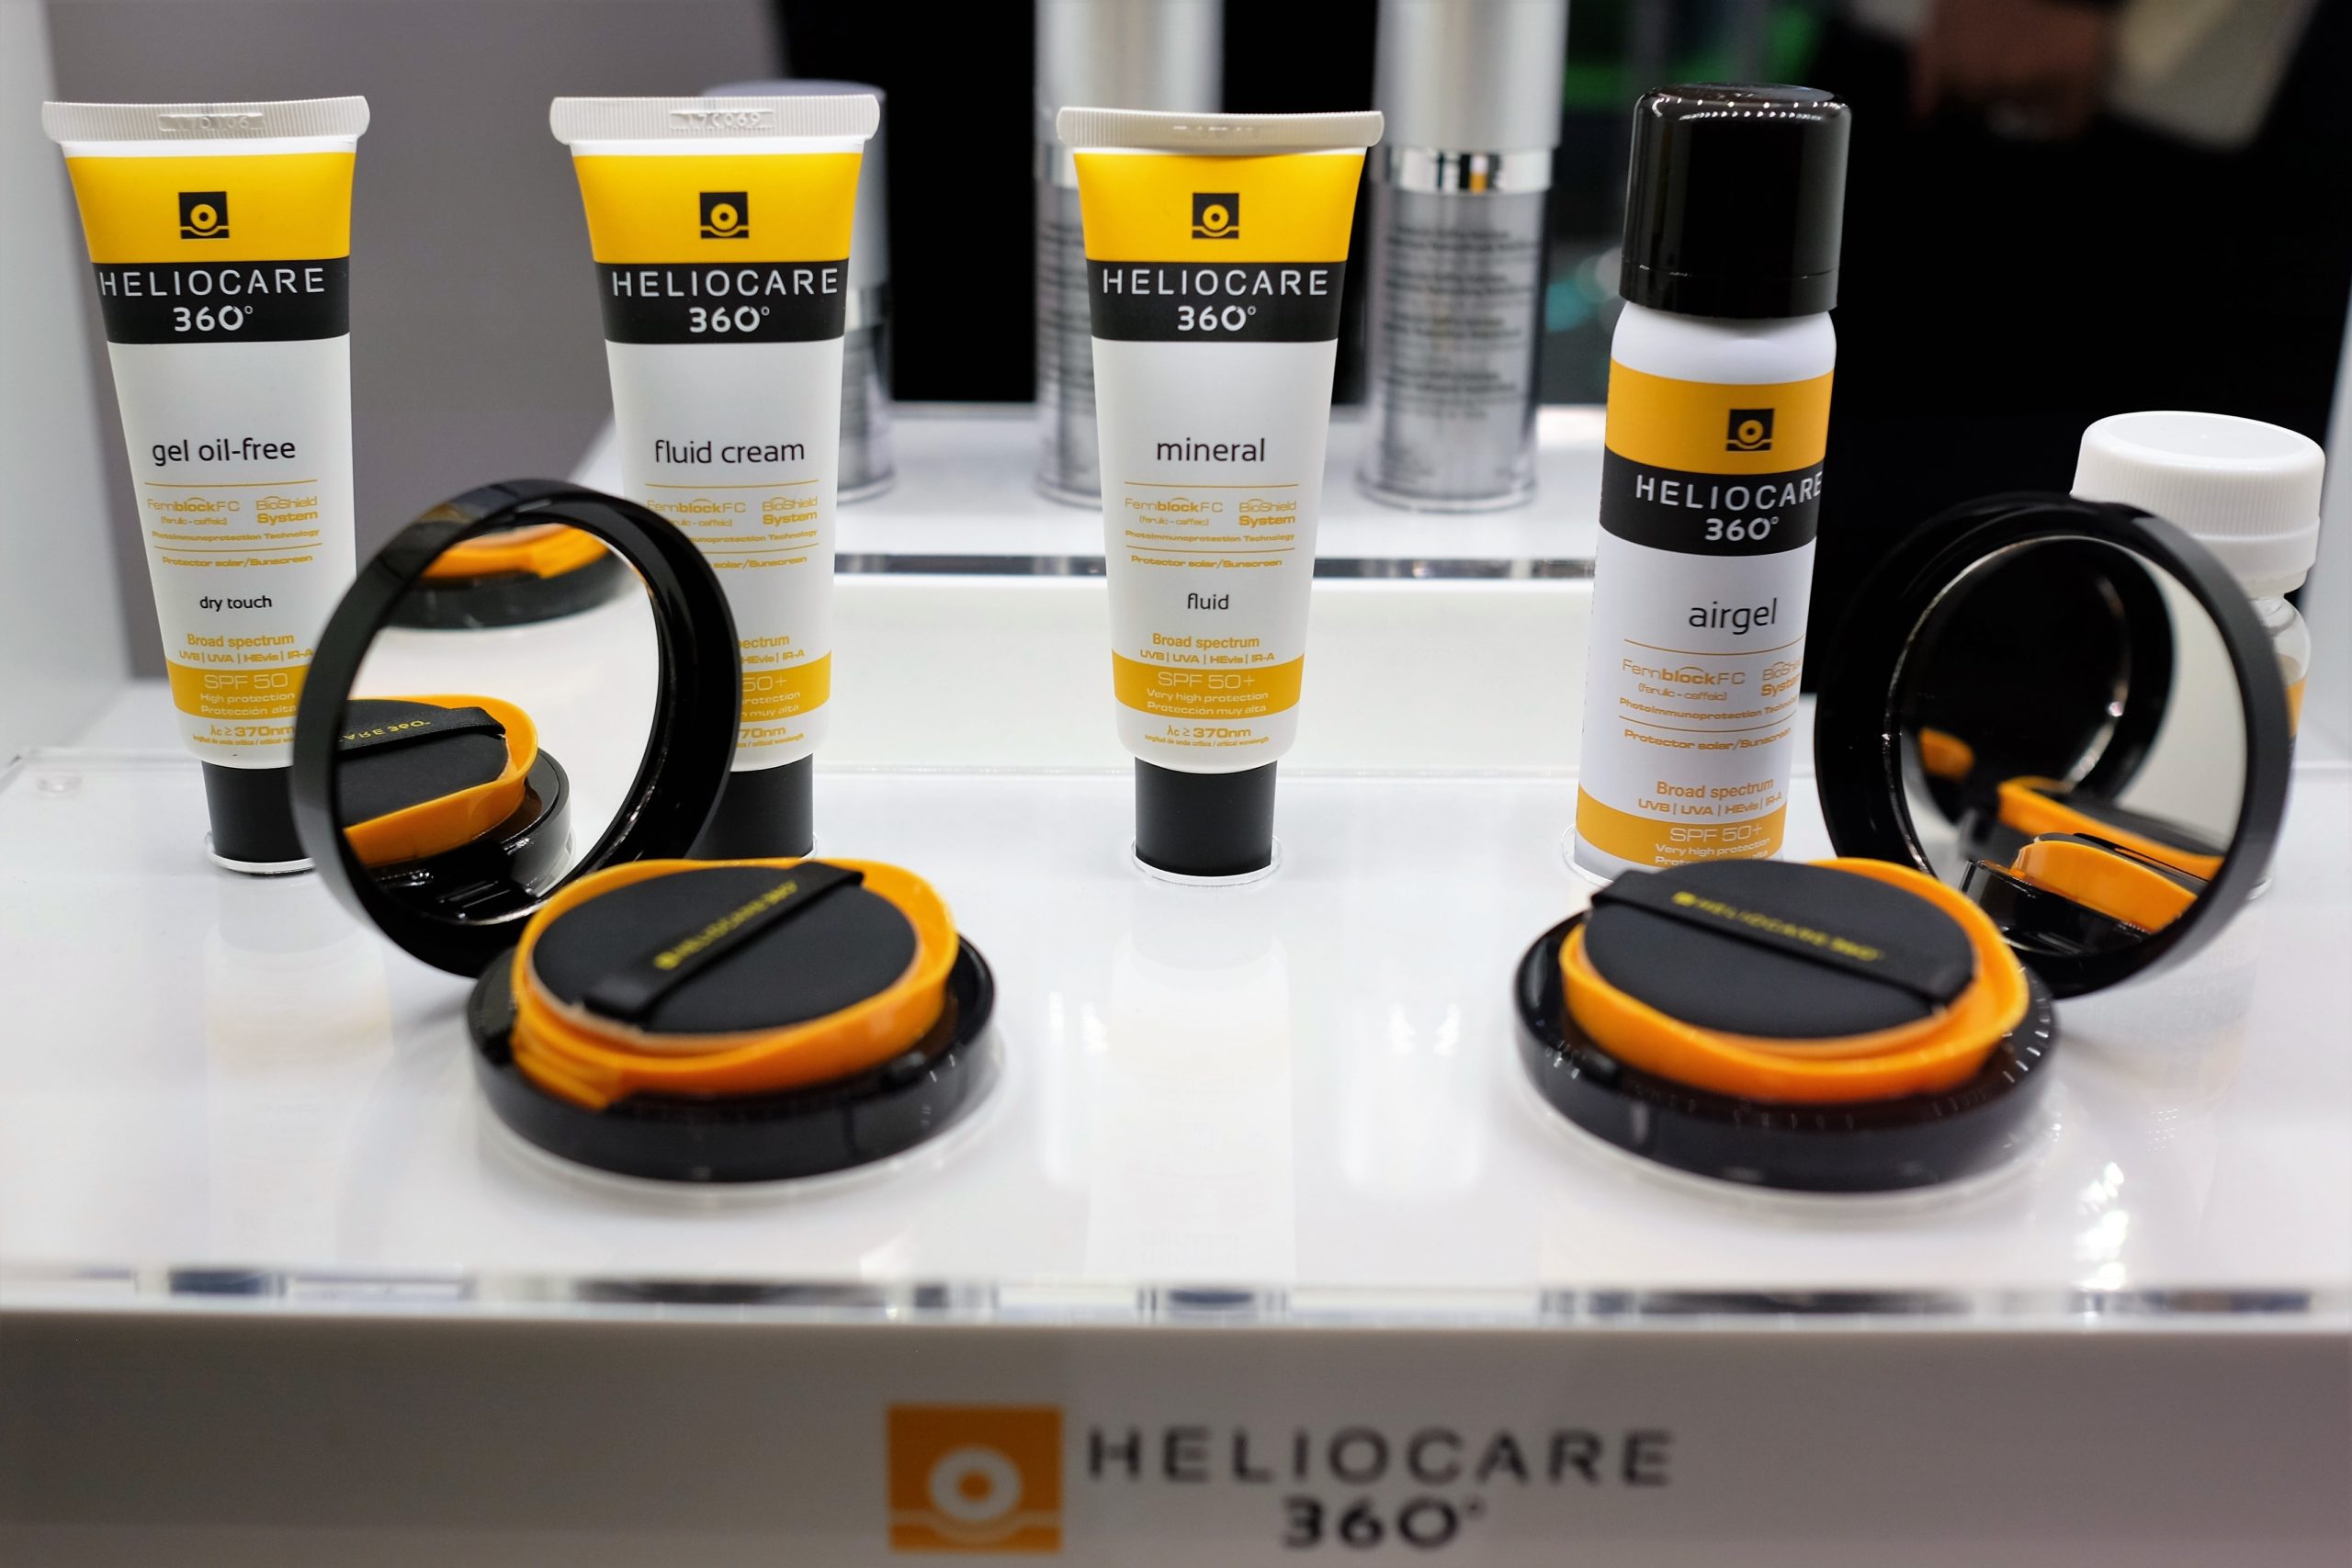 Heliocare 360 skin care products